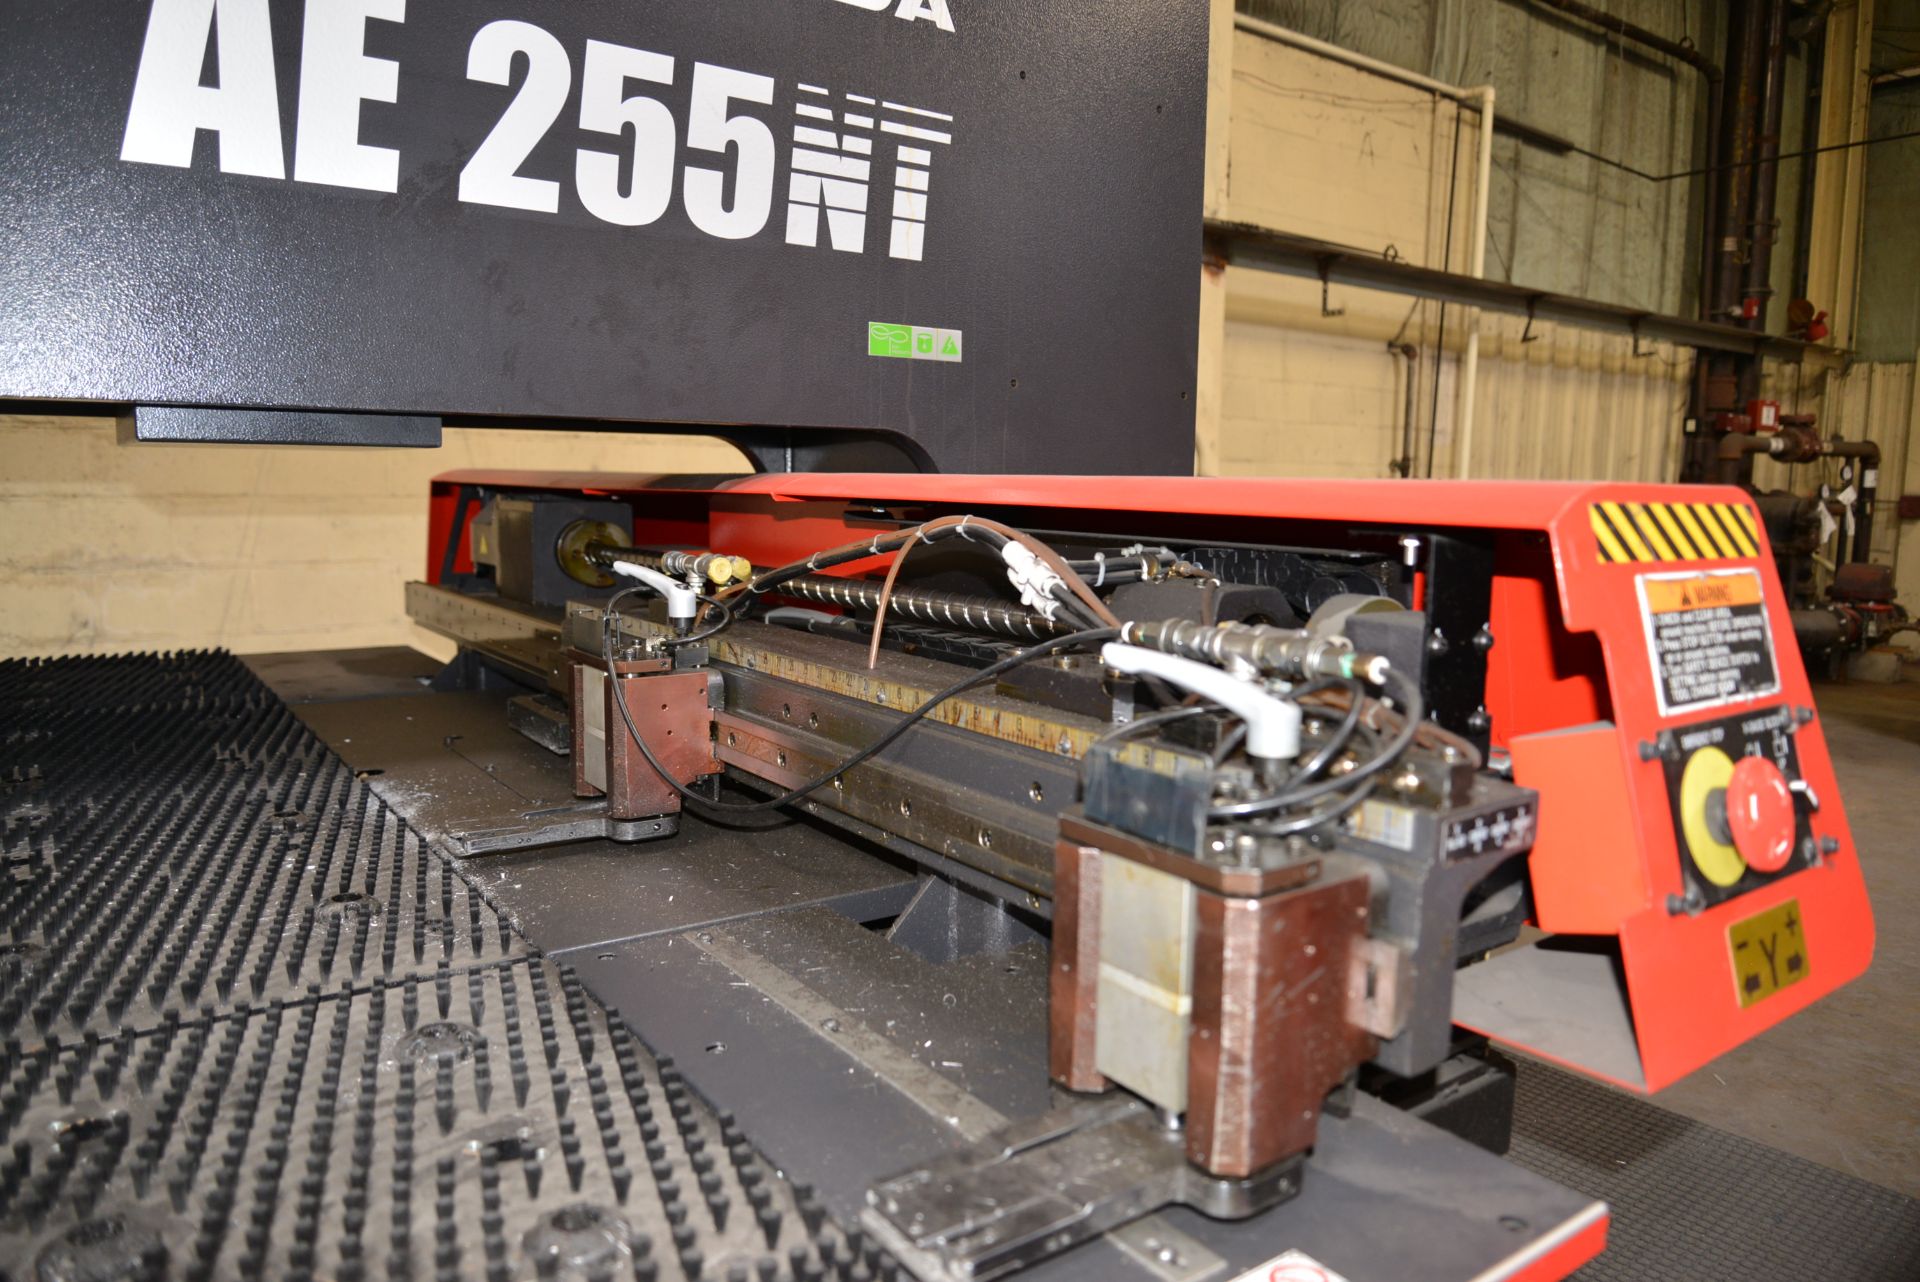 2013 AMADA AE255NT TURRET PUNCH; CAP/FORCE 200 KN, 45 TURRET STATIONS, POWER REQUIREMENT 19 KVA, - Image 4 of 4